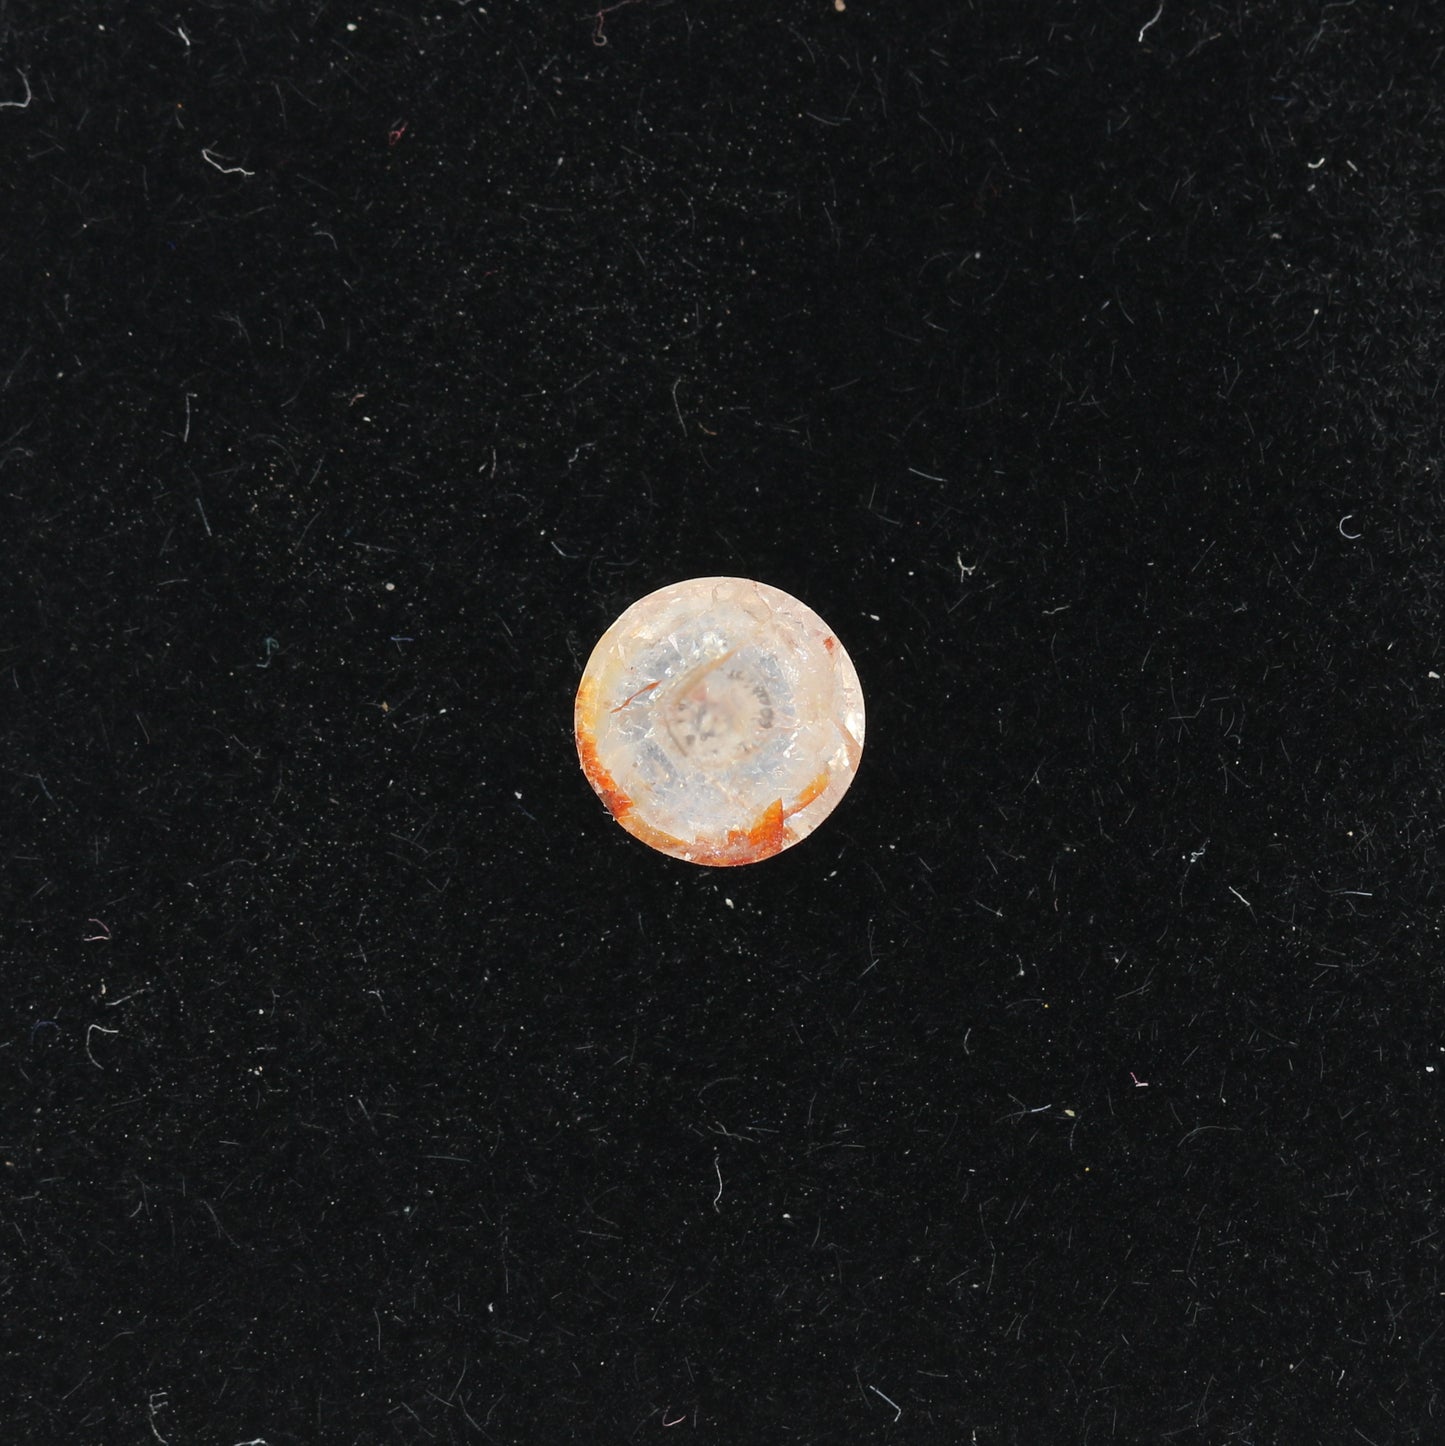 0.84 CT Natural Loose Peach Color Round Brilliant Shape Diamond for Engagement Ring